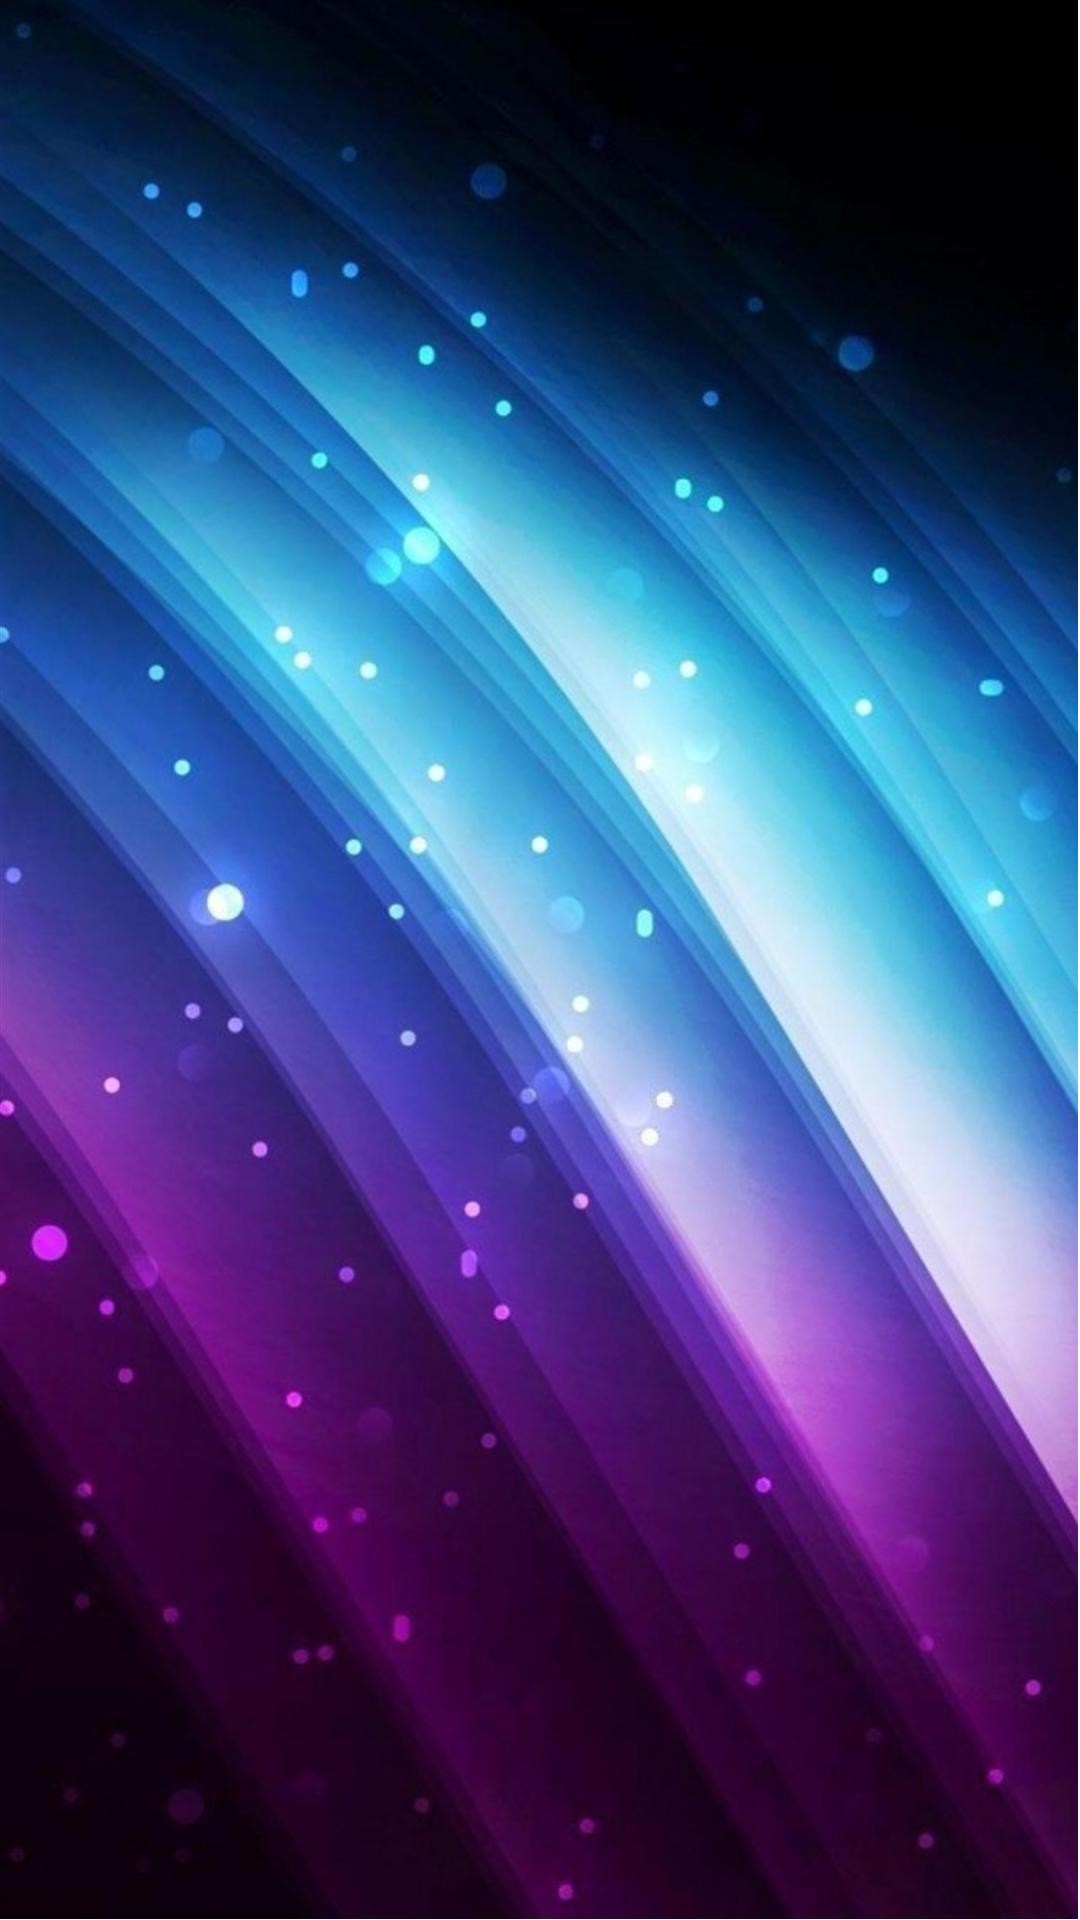 Mobile Wallpaper Themes Cool Background For Your Cell Phone